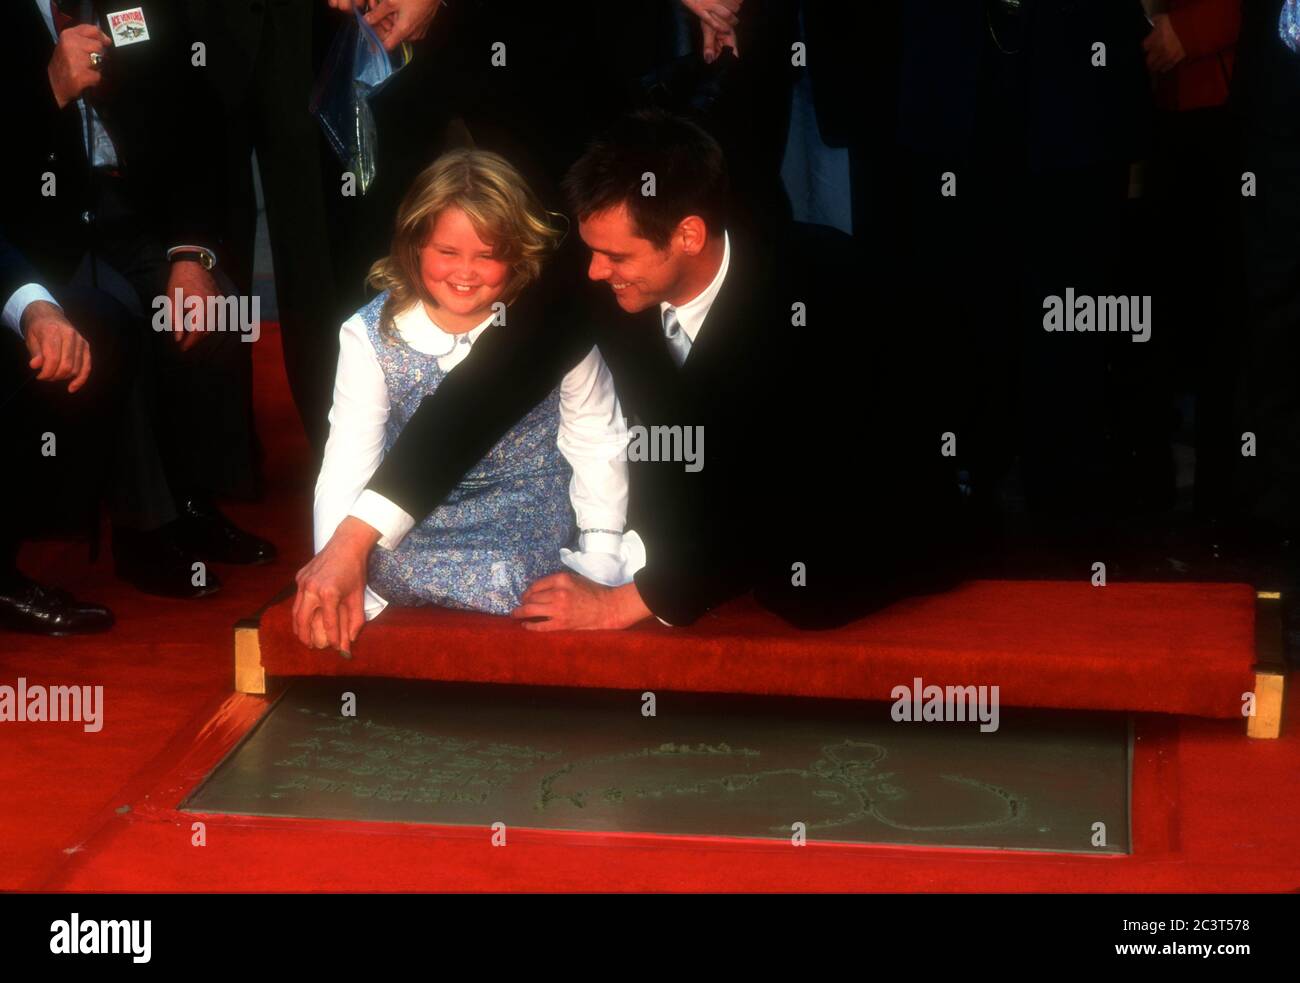 Hollywood, California, USA 2nd November 1995 Actor Jim Carrey and daughter Jane Carrey attend Jim Carrey's hand and footprint in cement ceremony on November 2, 1995 at Mann's Chinese Theatre in Hollywood, California, USA. Photo by Barry King/Alamy Stock Photo Stock Photo